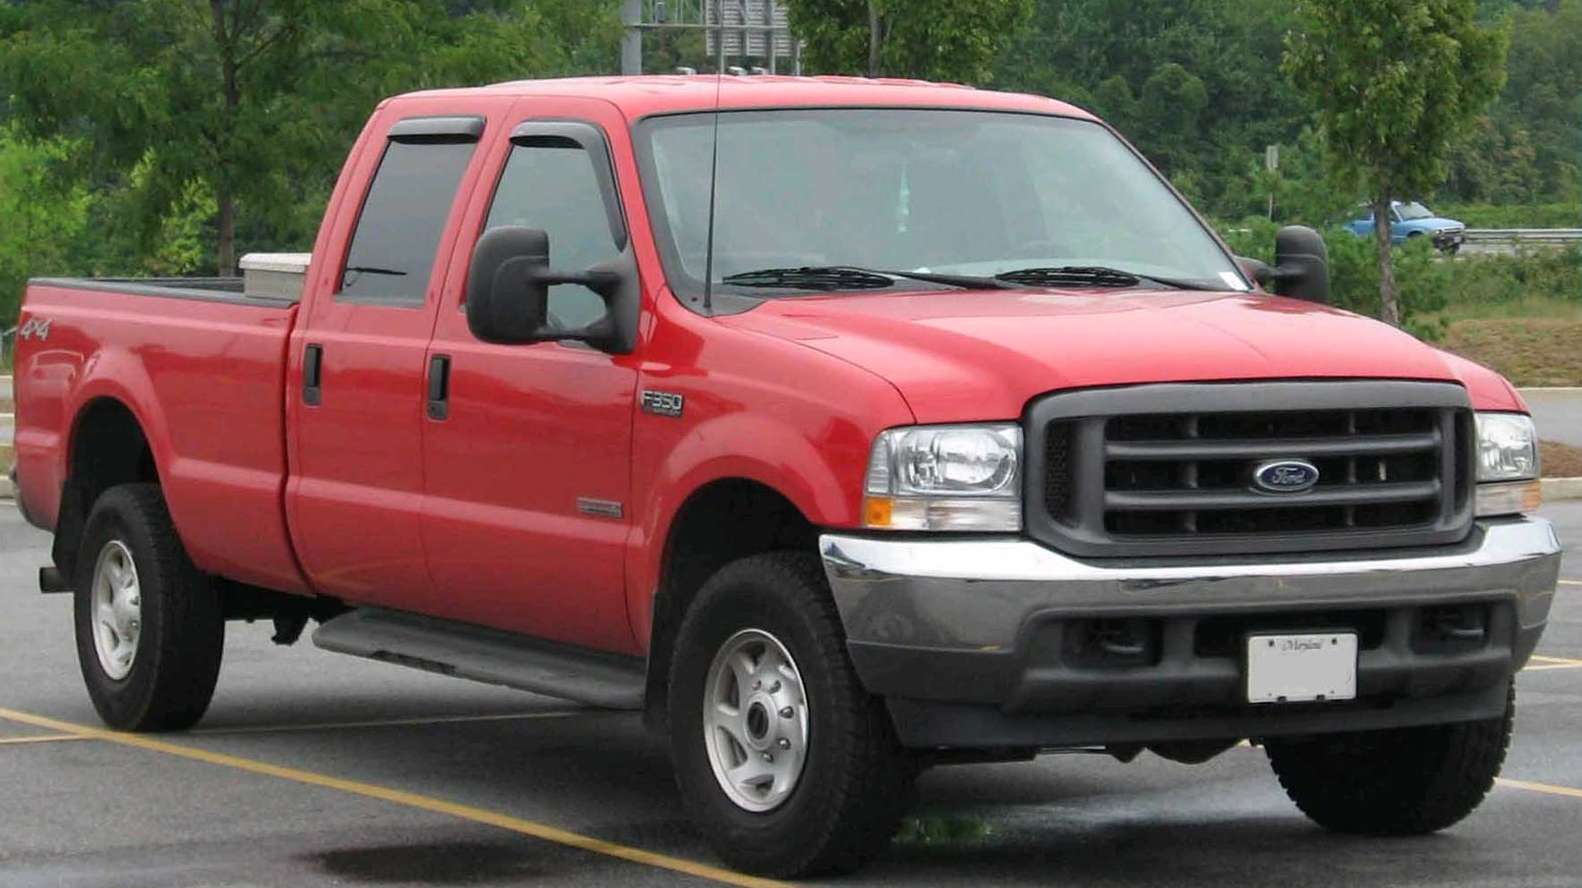 Red 1999 Ford F-350 parked in a parking lot